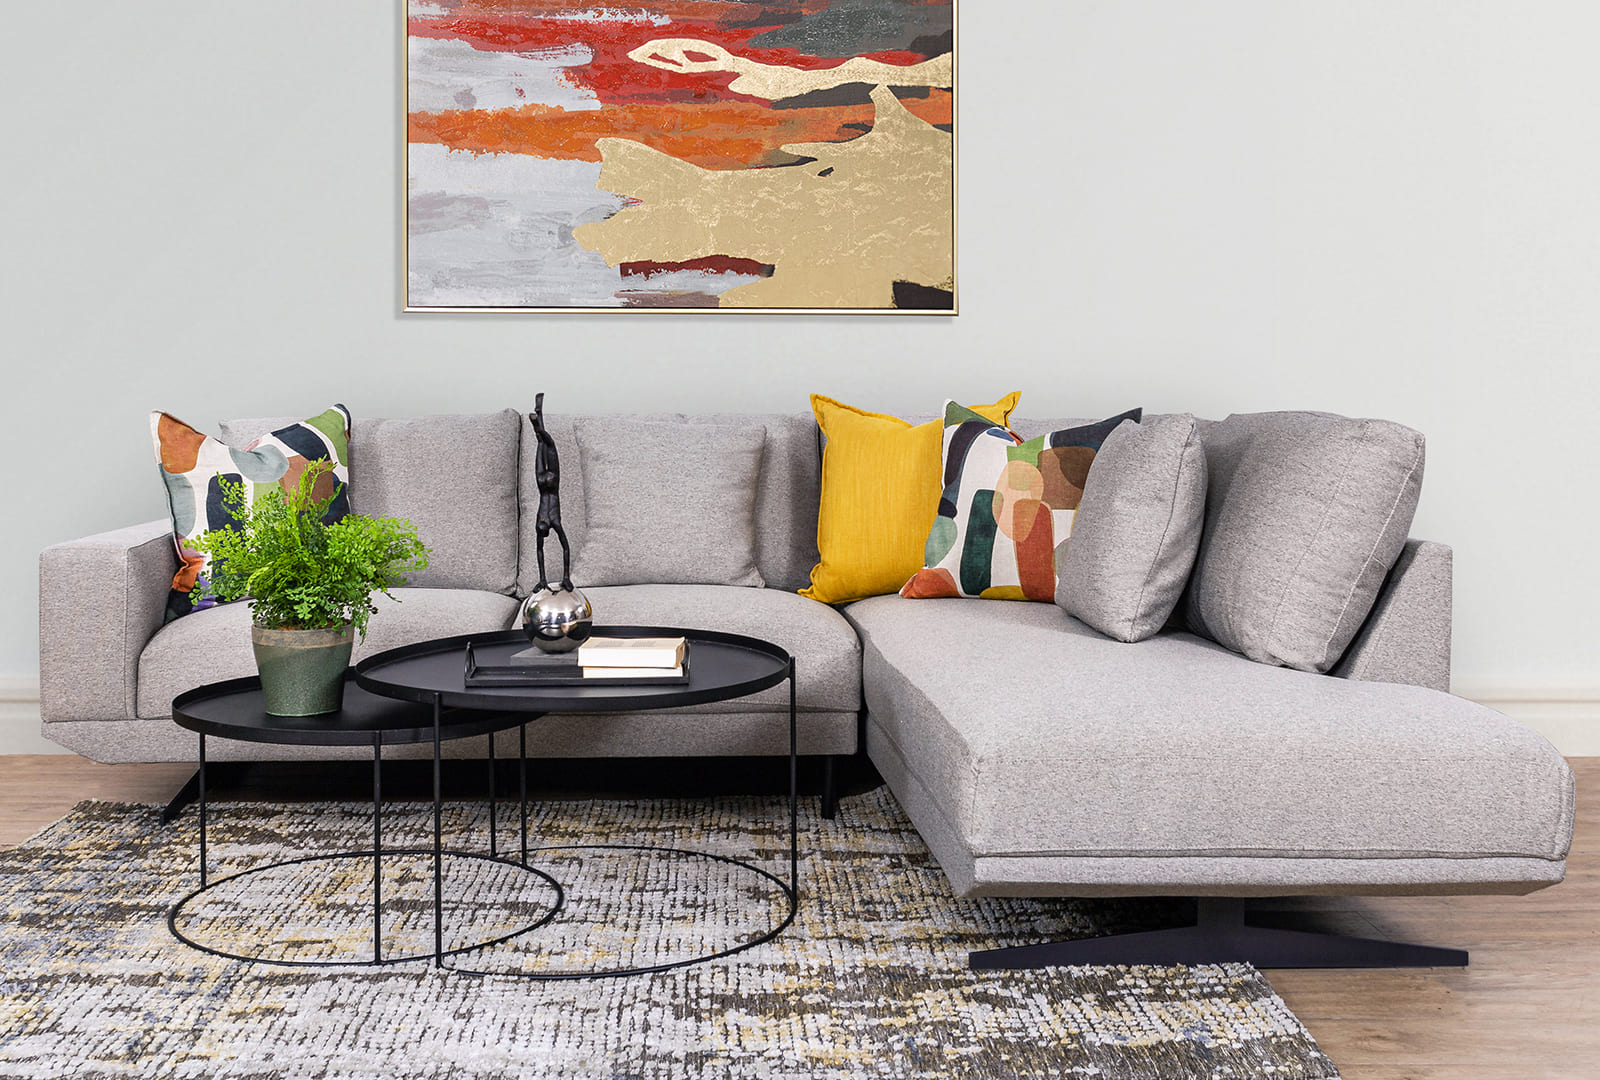 Plan Your Upholstery That Matches Your Lifestyle